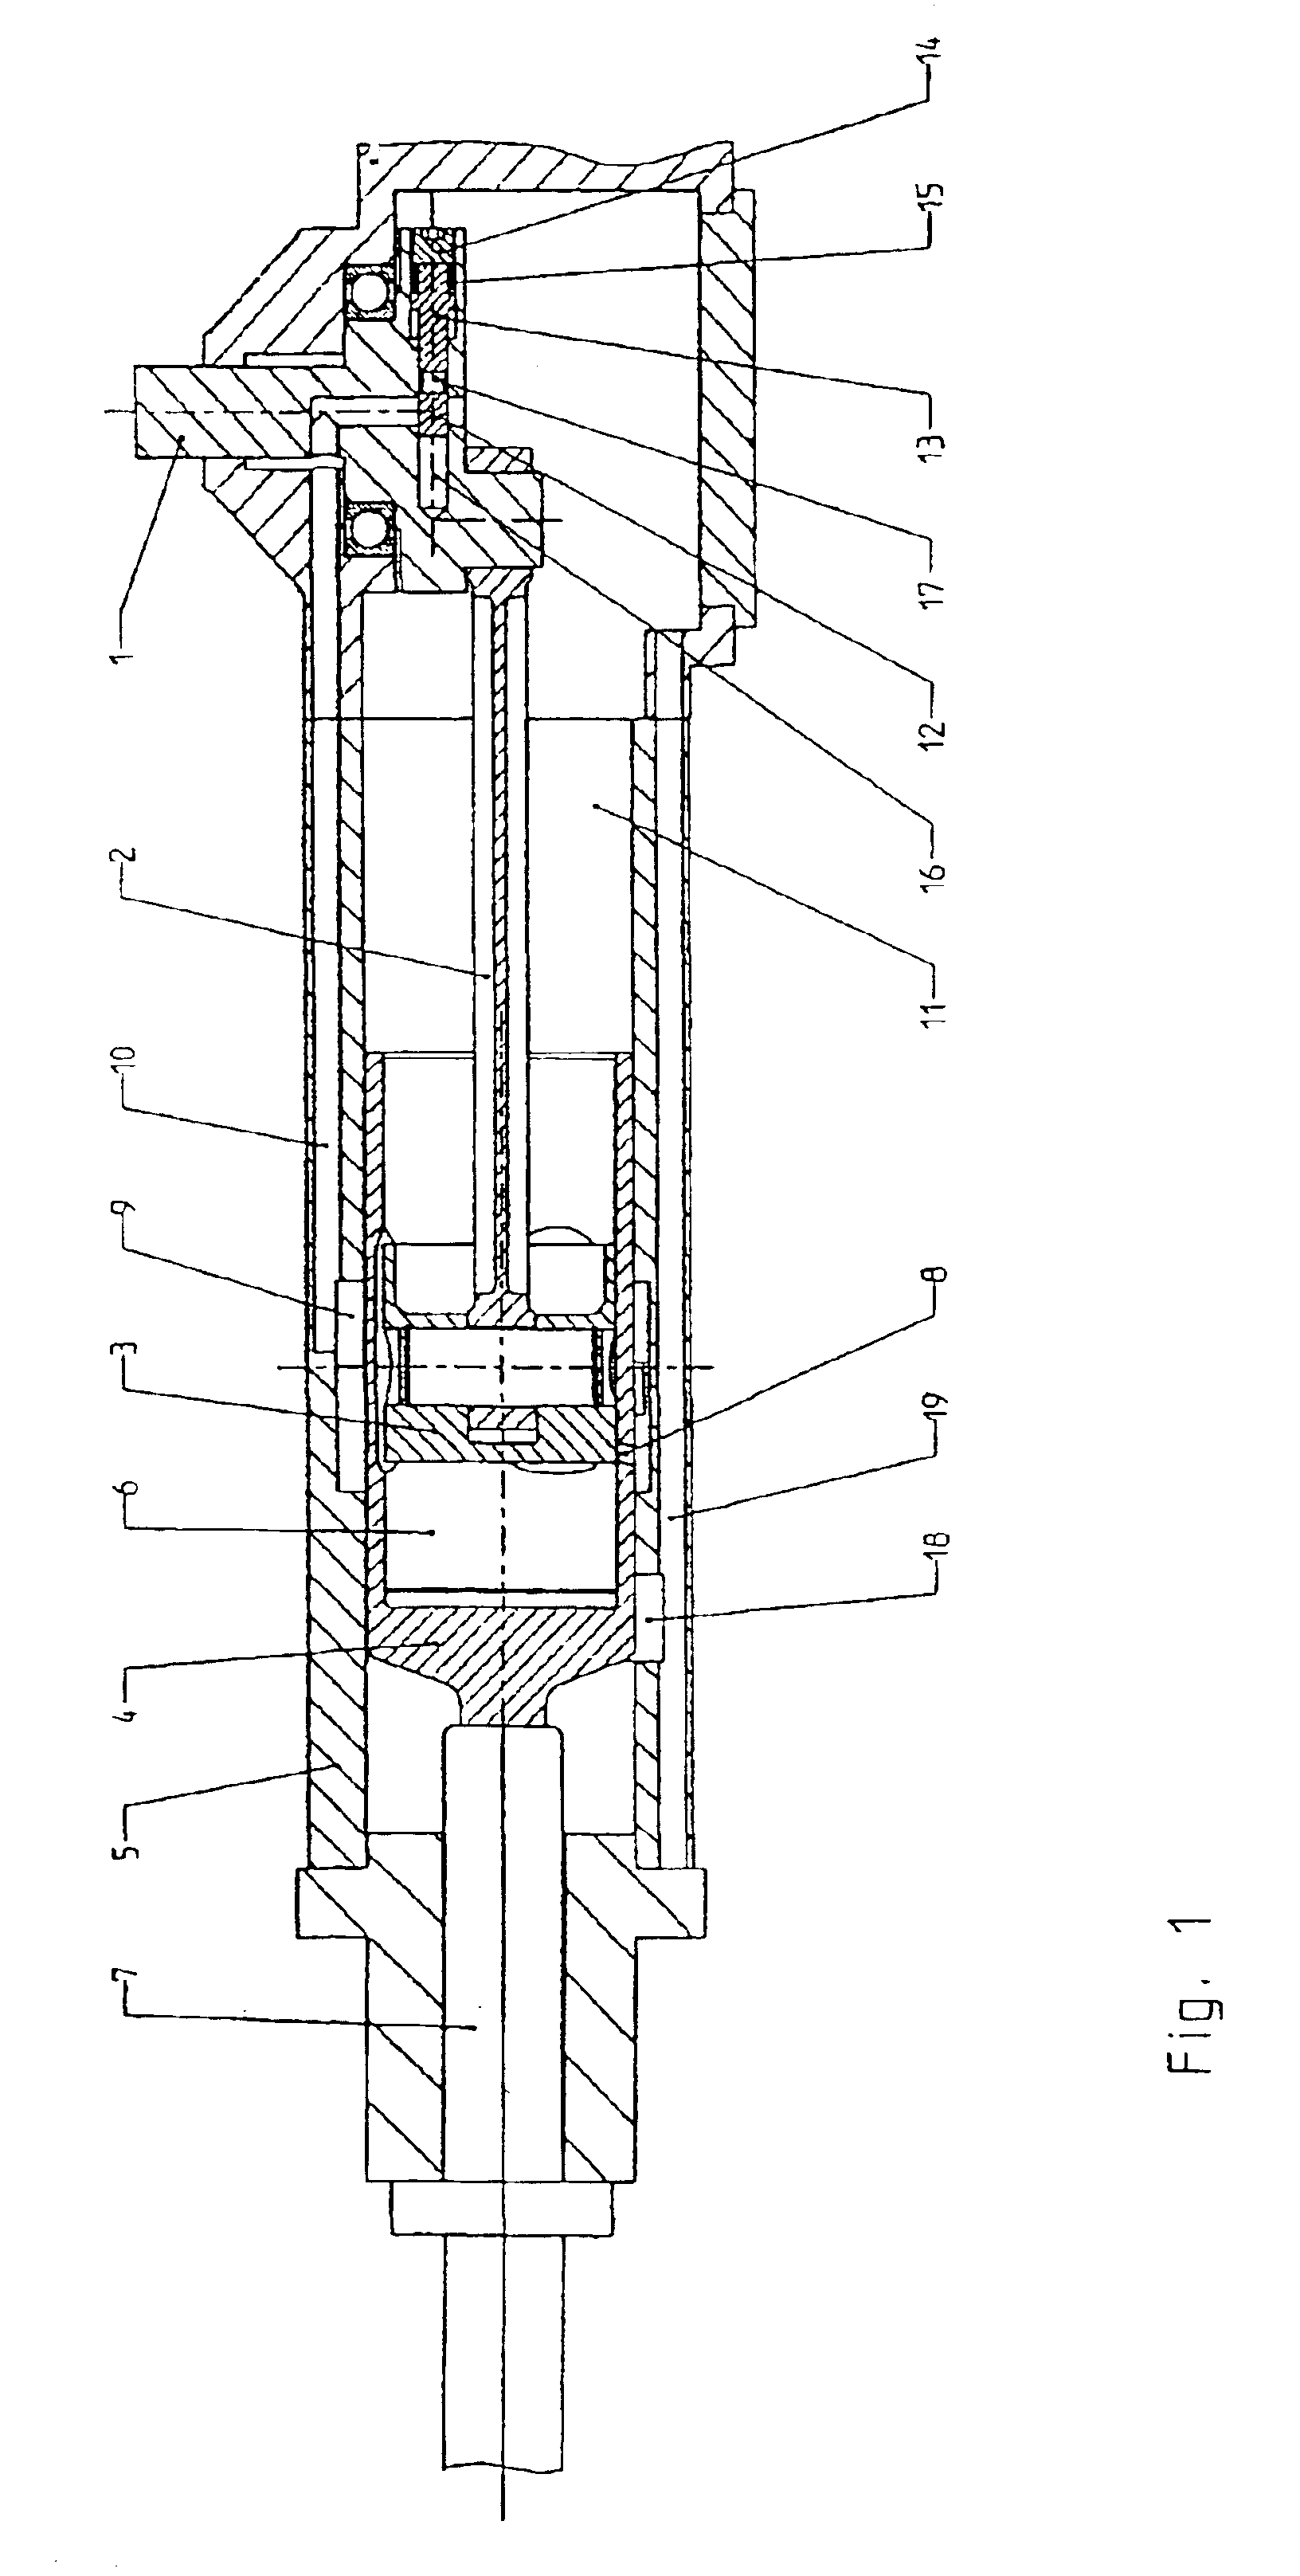 Pneumatic percussive tool with a movement frequency controlled idling position